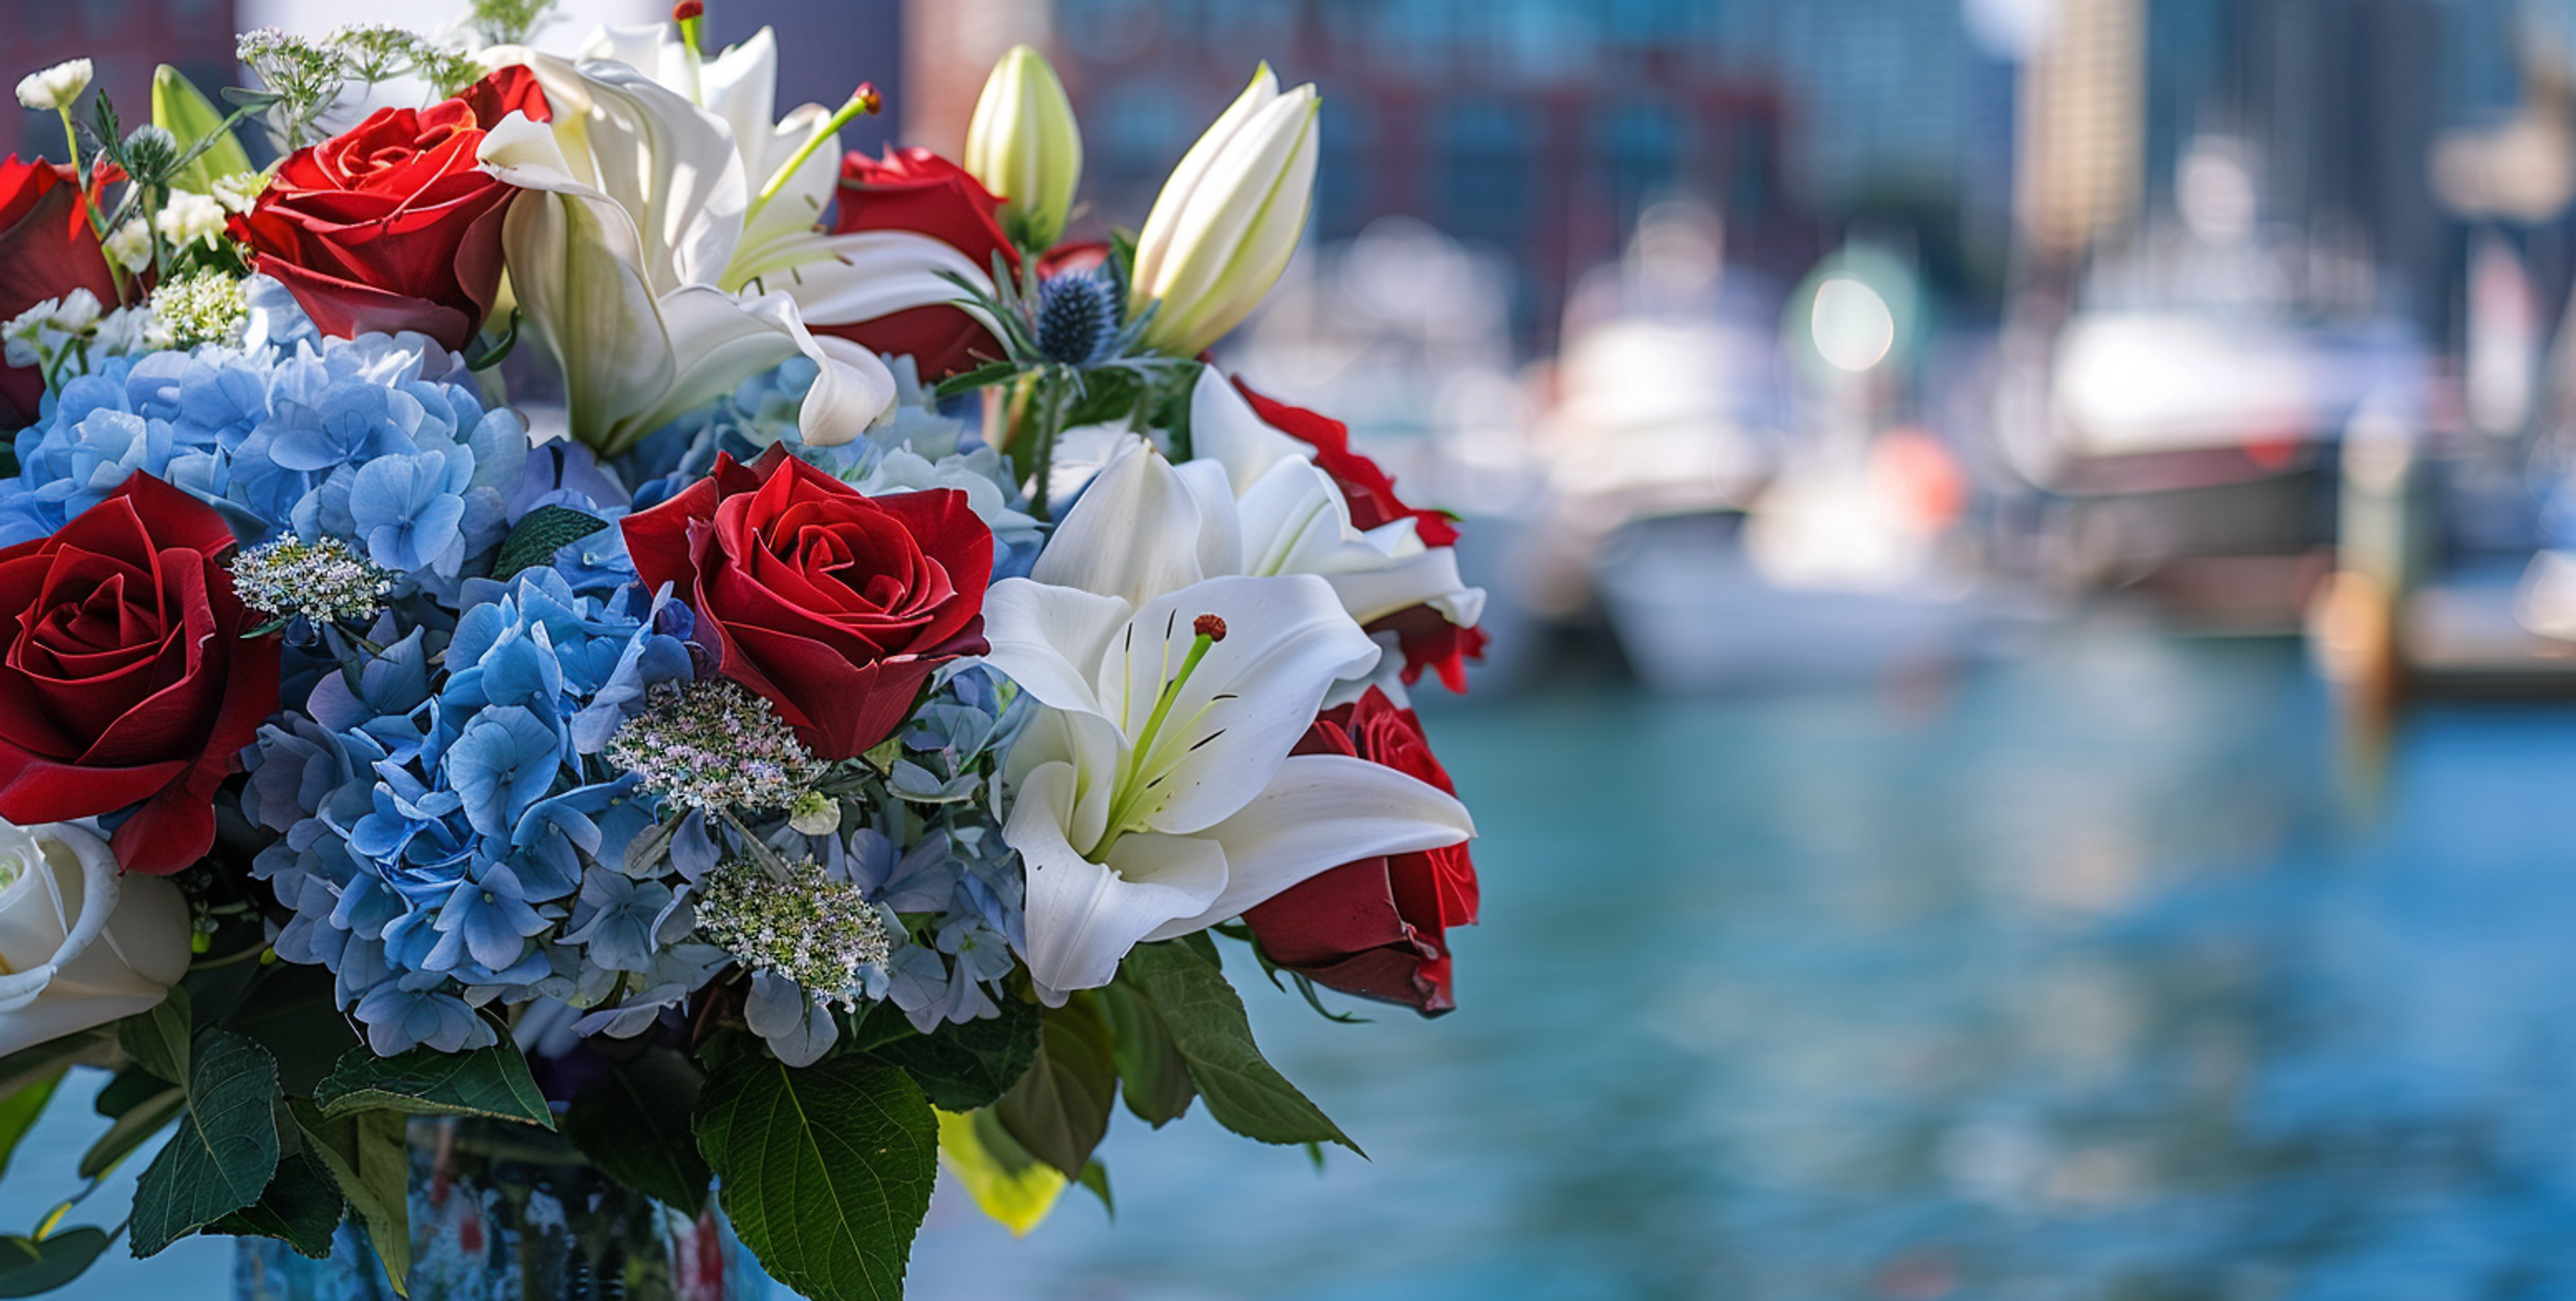 Photo of arrangement with red roses, blue hydrangea with blurred background of the Boston harbor.